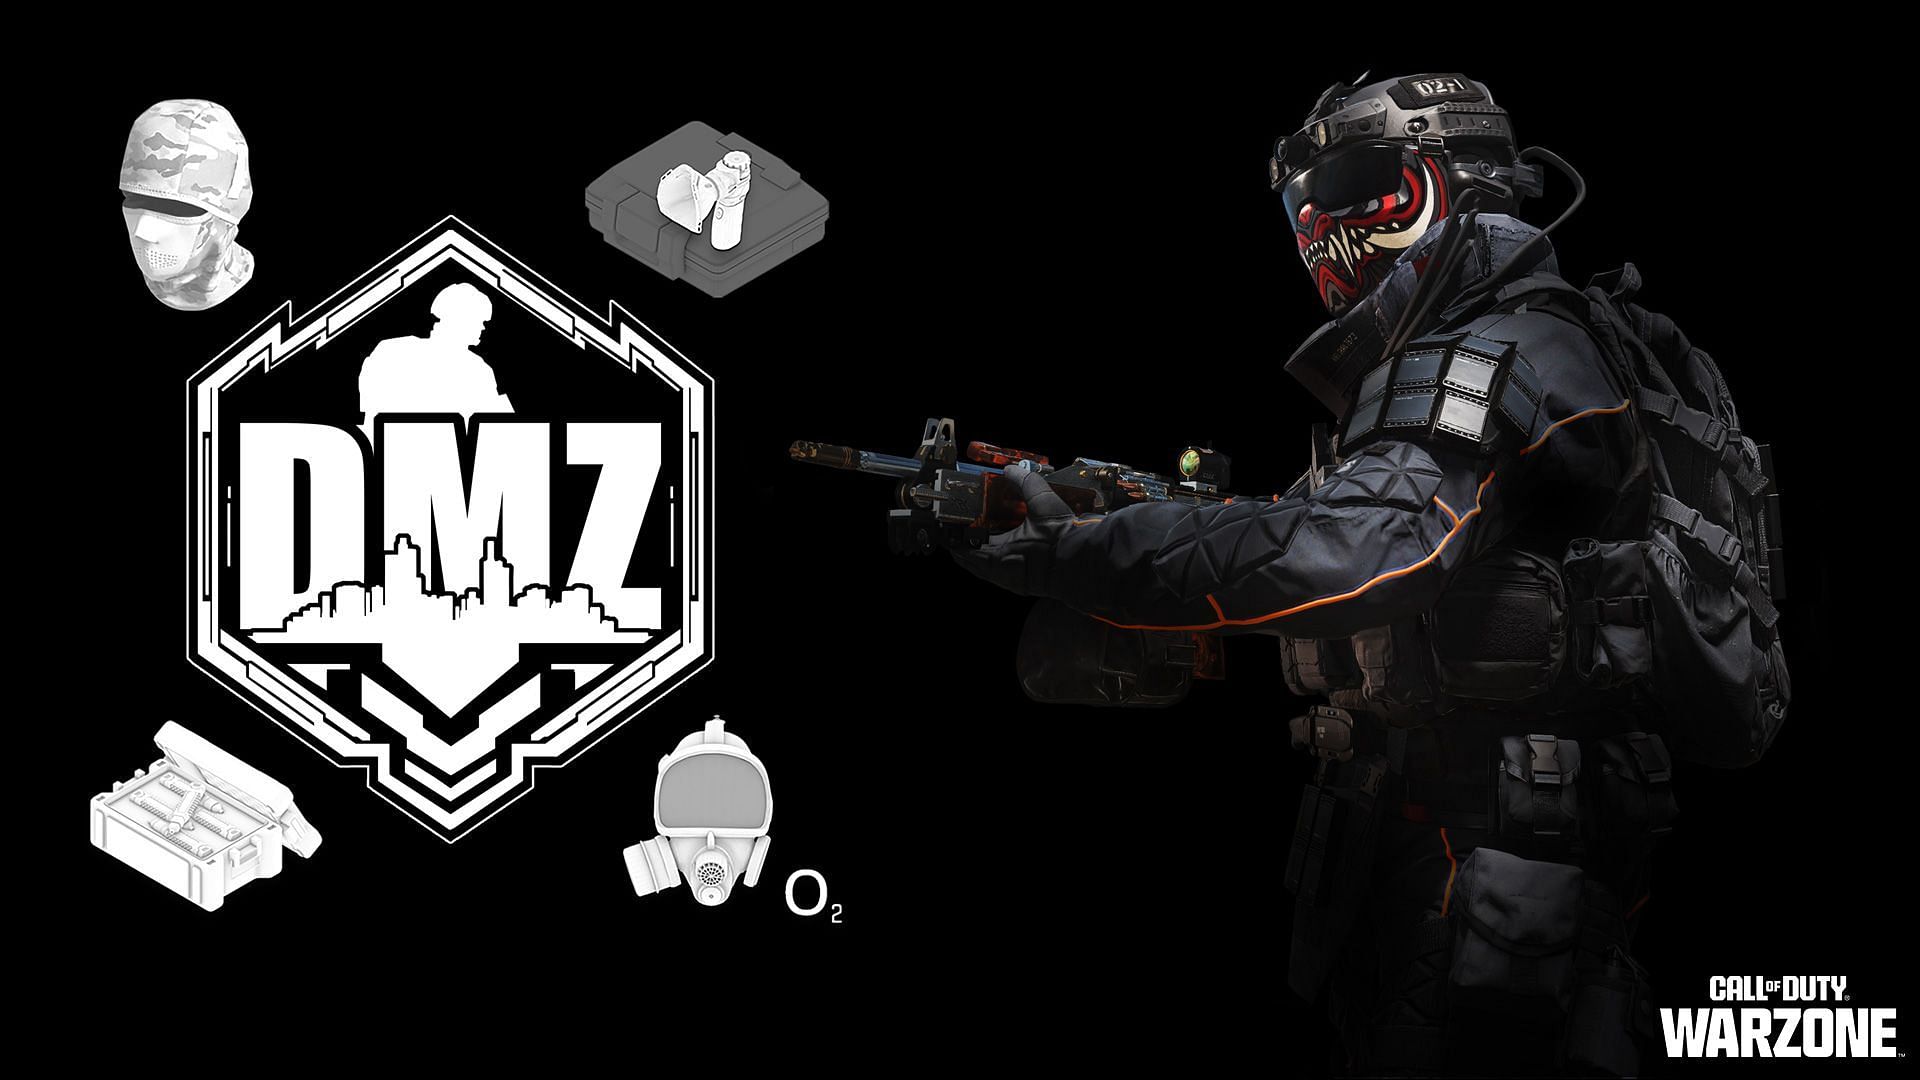 An Operator on the right with a weapon faced toward the icons of the new Field Upgrades in Season 5 of Warzone 2 DMZ. The icons listed are for Disguised Field Upgrade, Battle Revive, Self-Revive Box, and Scuba Gas Mask, surrounding a DMZ logo placed in the center. 